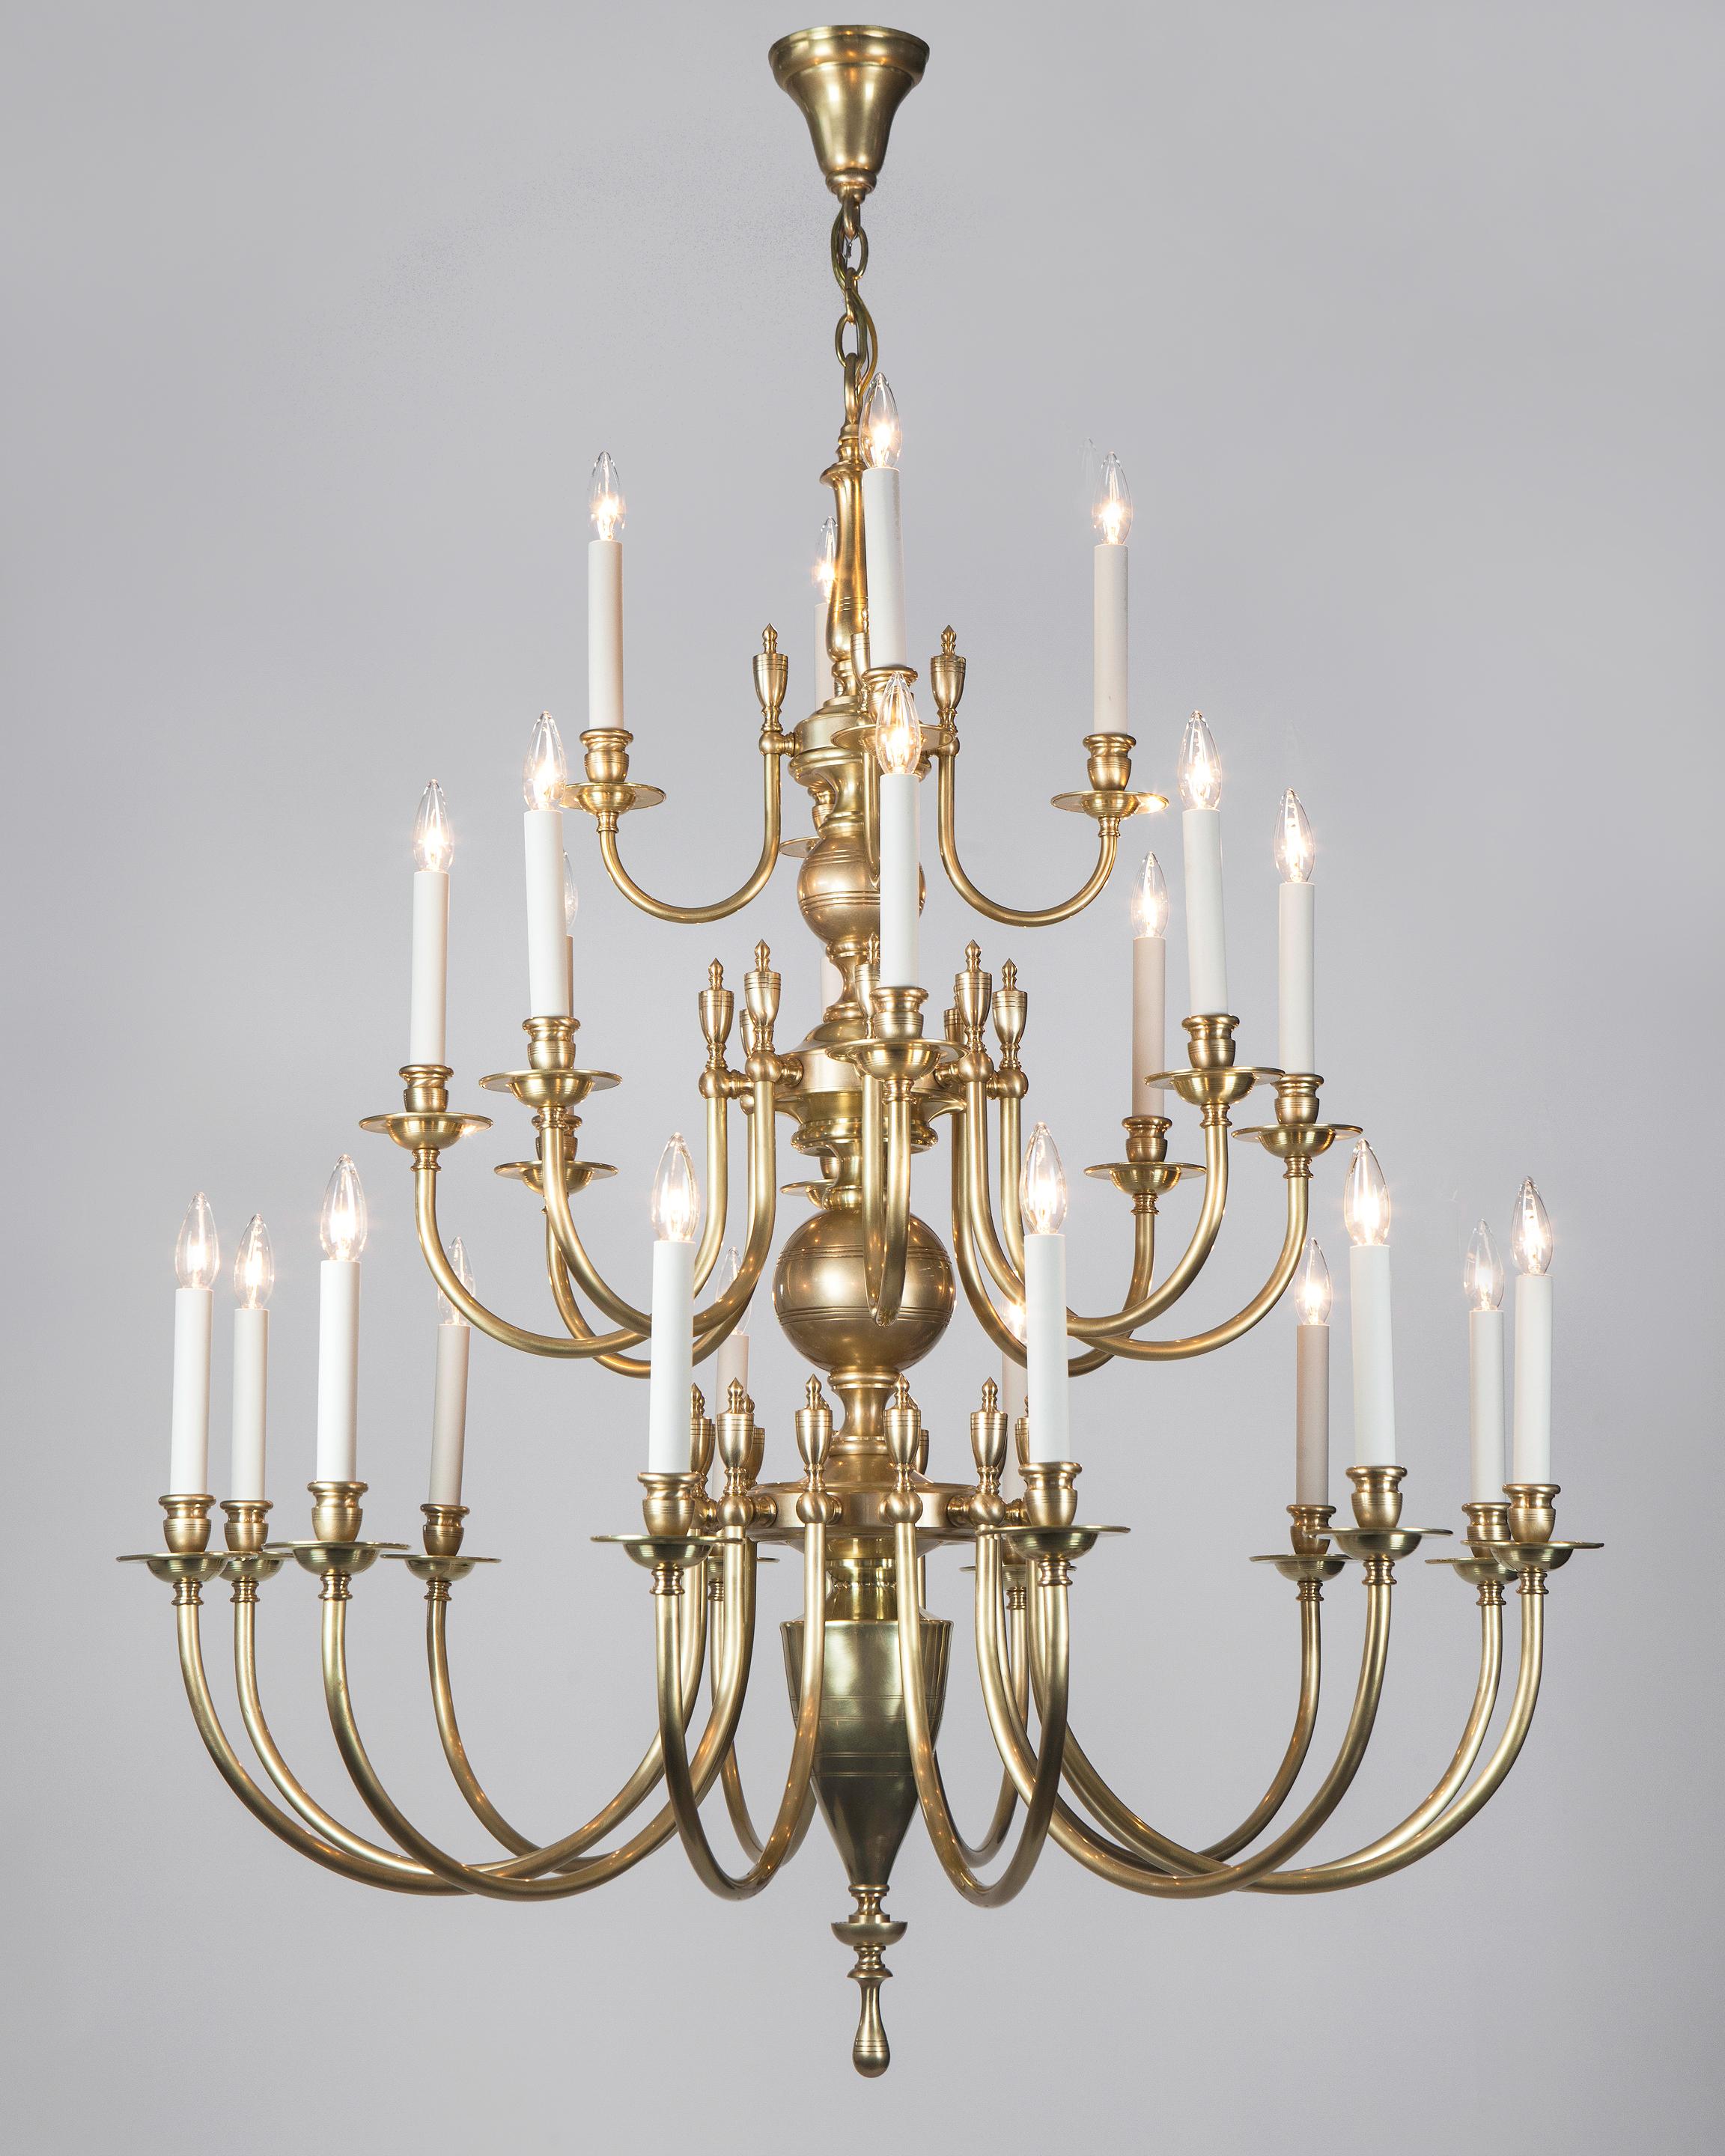 HL1293.24
The Astrid 24 chandelier by Remains Lighting is a large 24-light solid brass chandelier having three tiers of four over eight over twelve arms arrayed on a baluster-form stem. Subtle linear details are incised on the central ball,